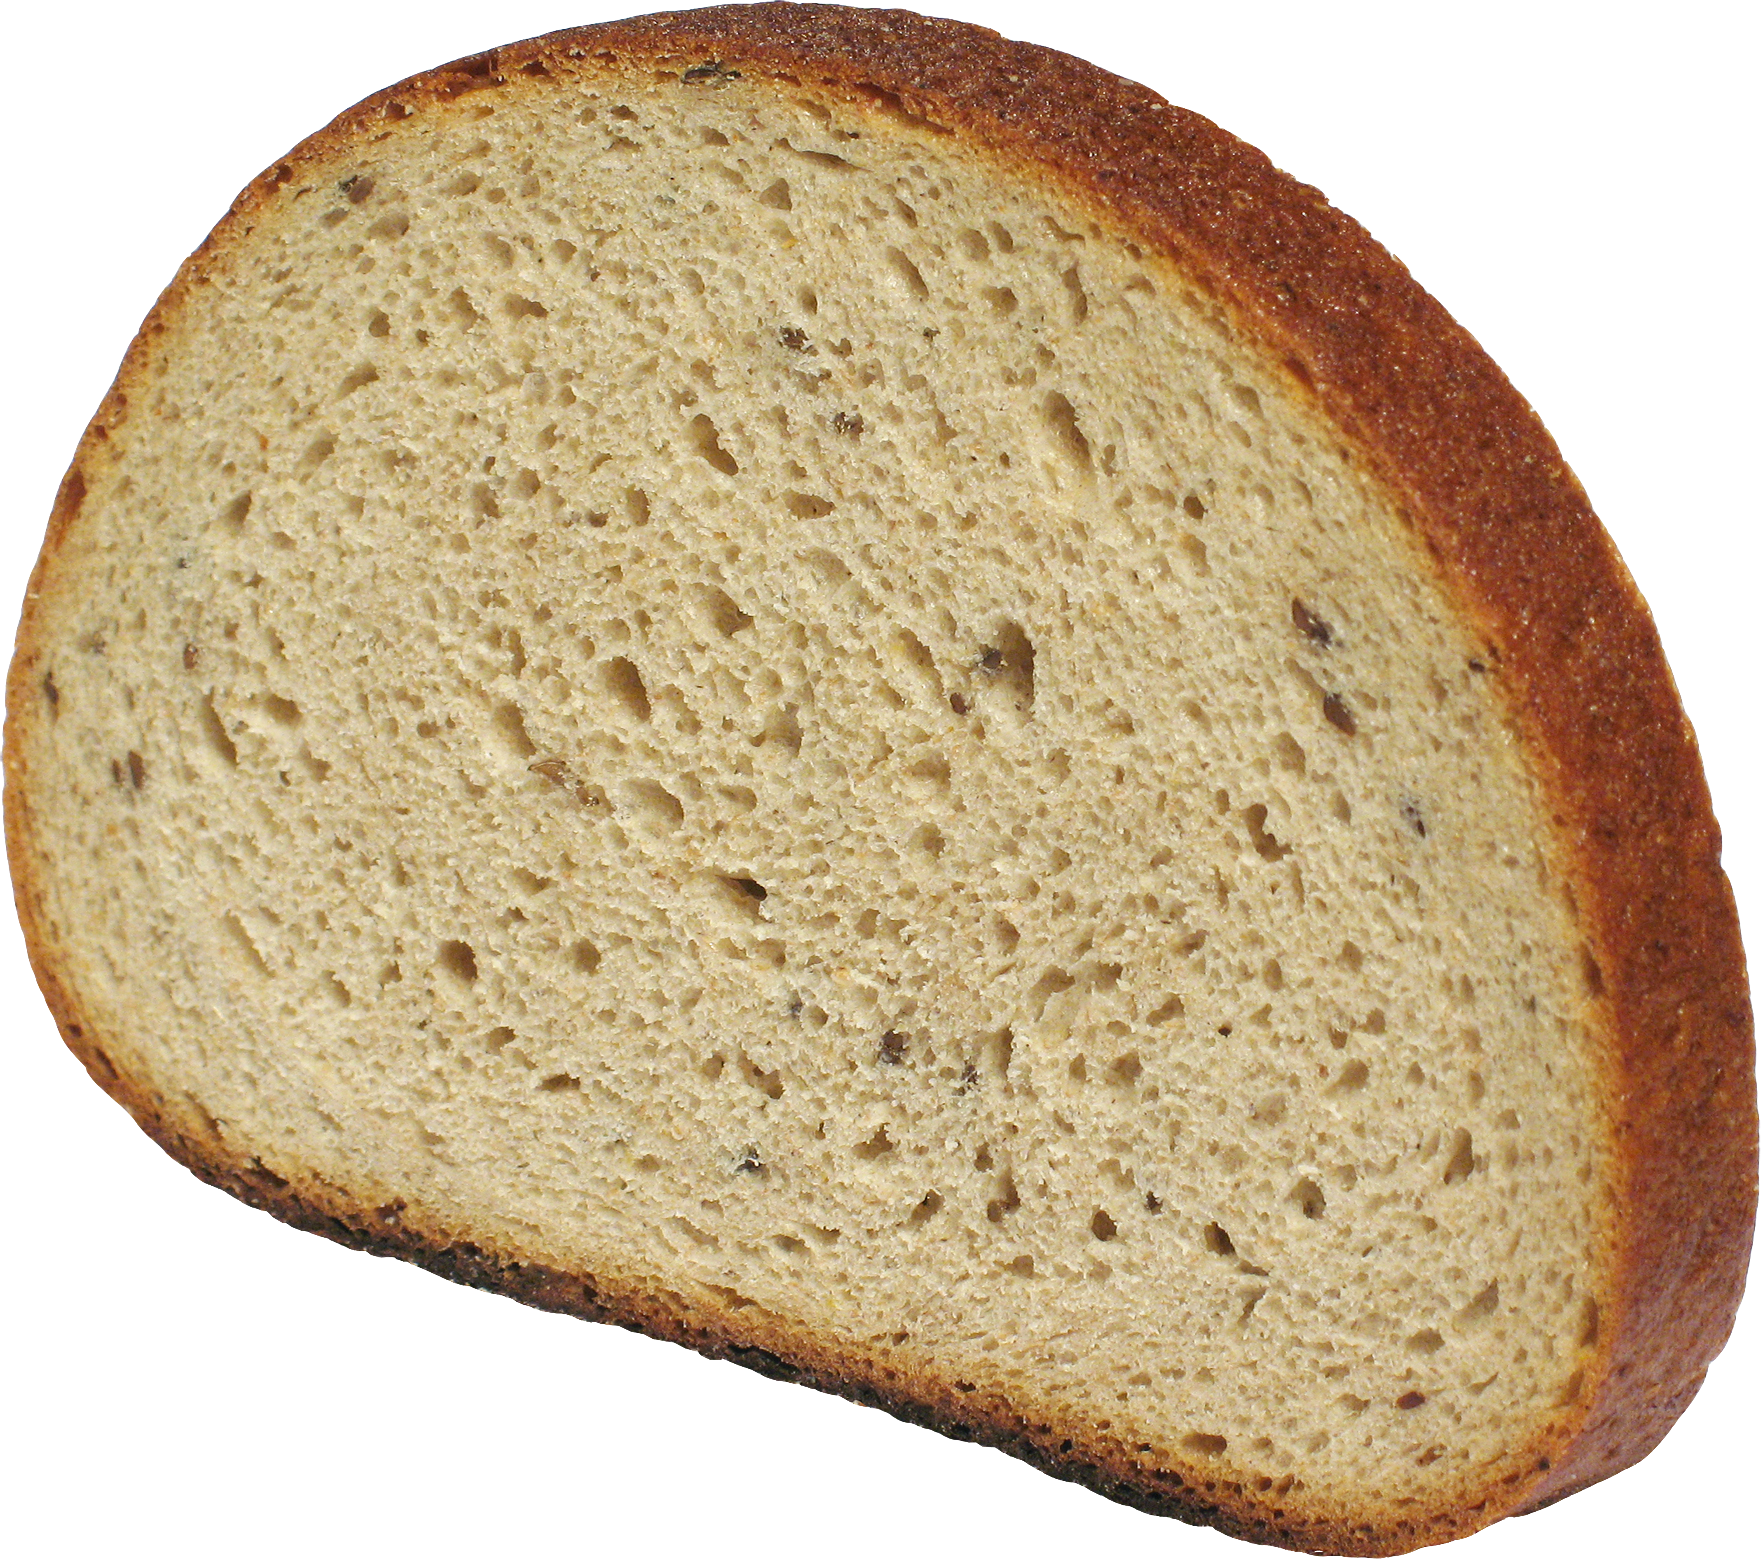 Slices Wheat Bread HD Image Free PNG Image